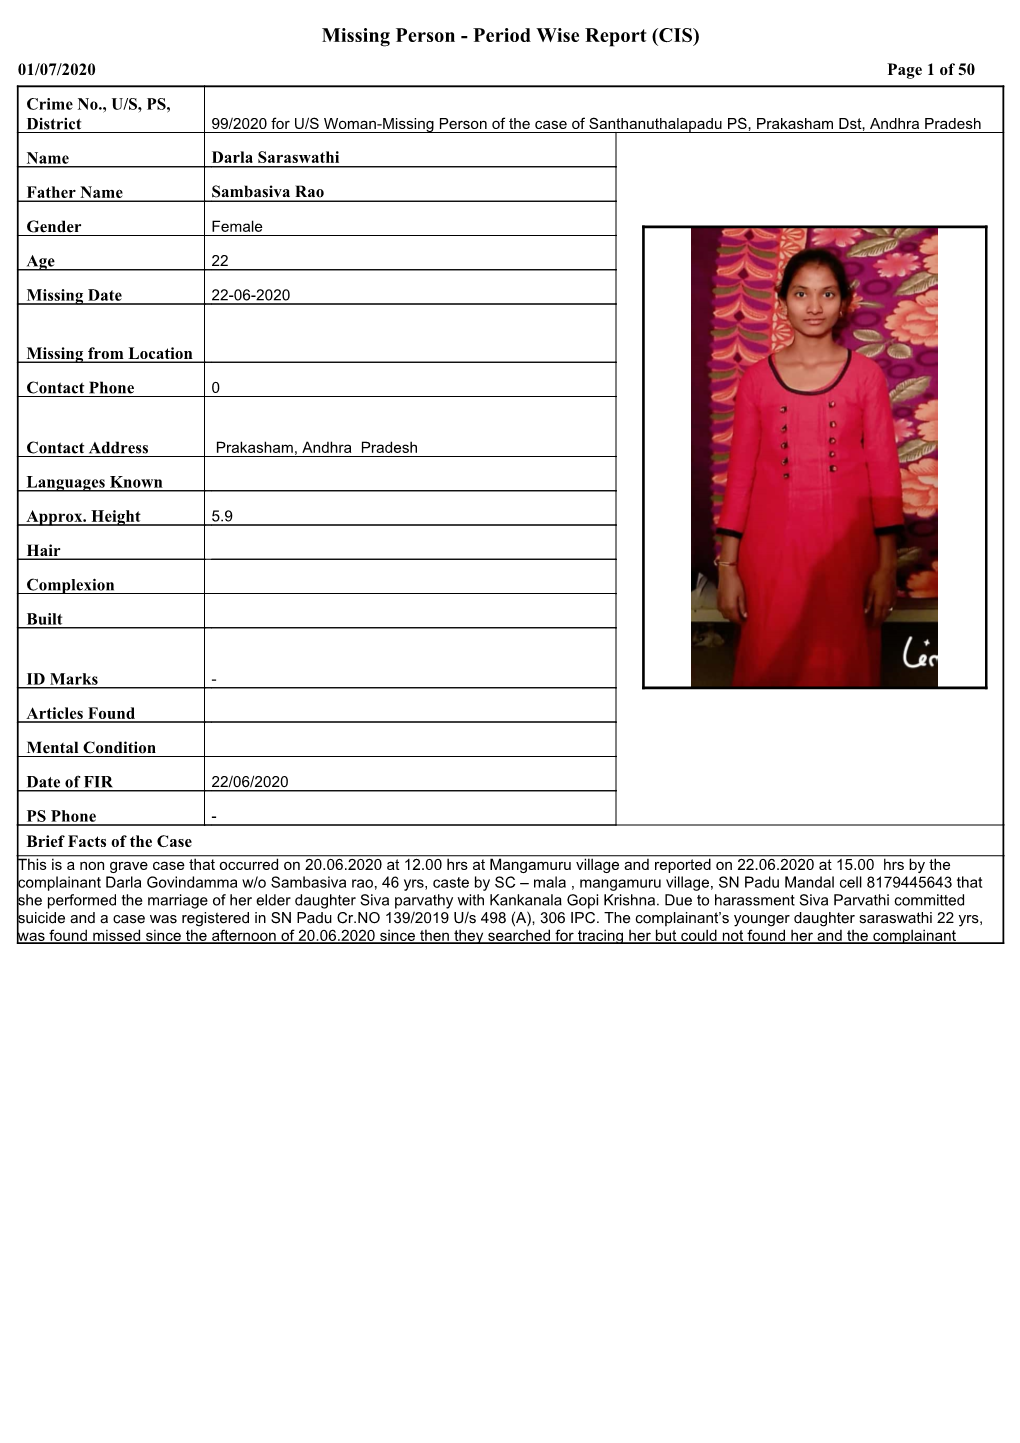 Missing Person - Period Wise Report (CIS) 01/07/2020 Page 1 of 50